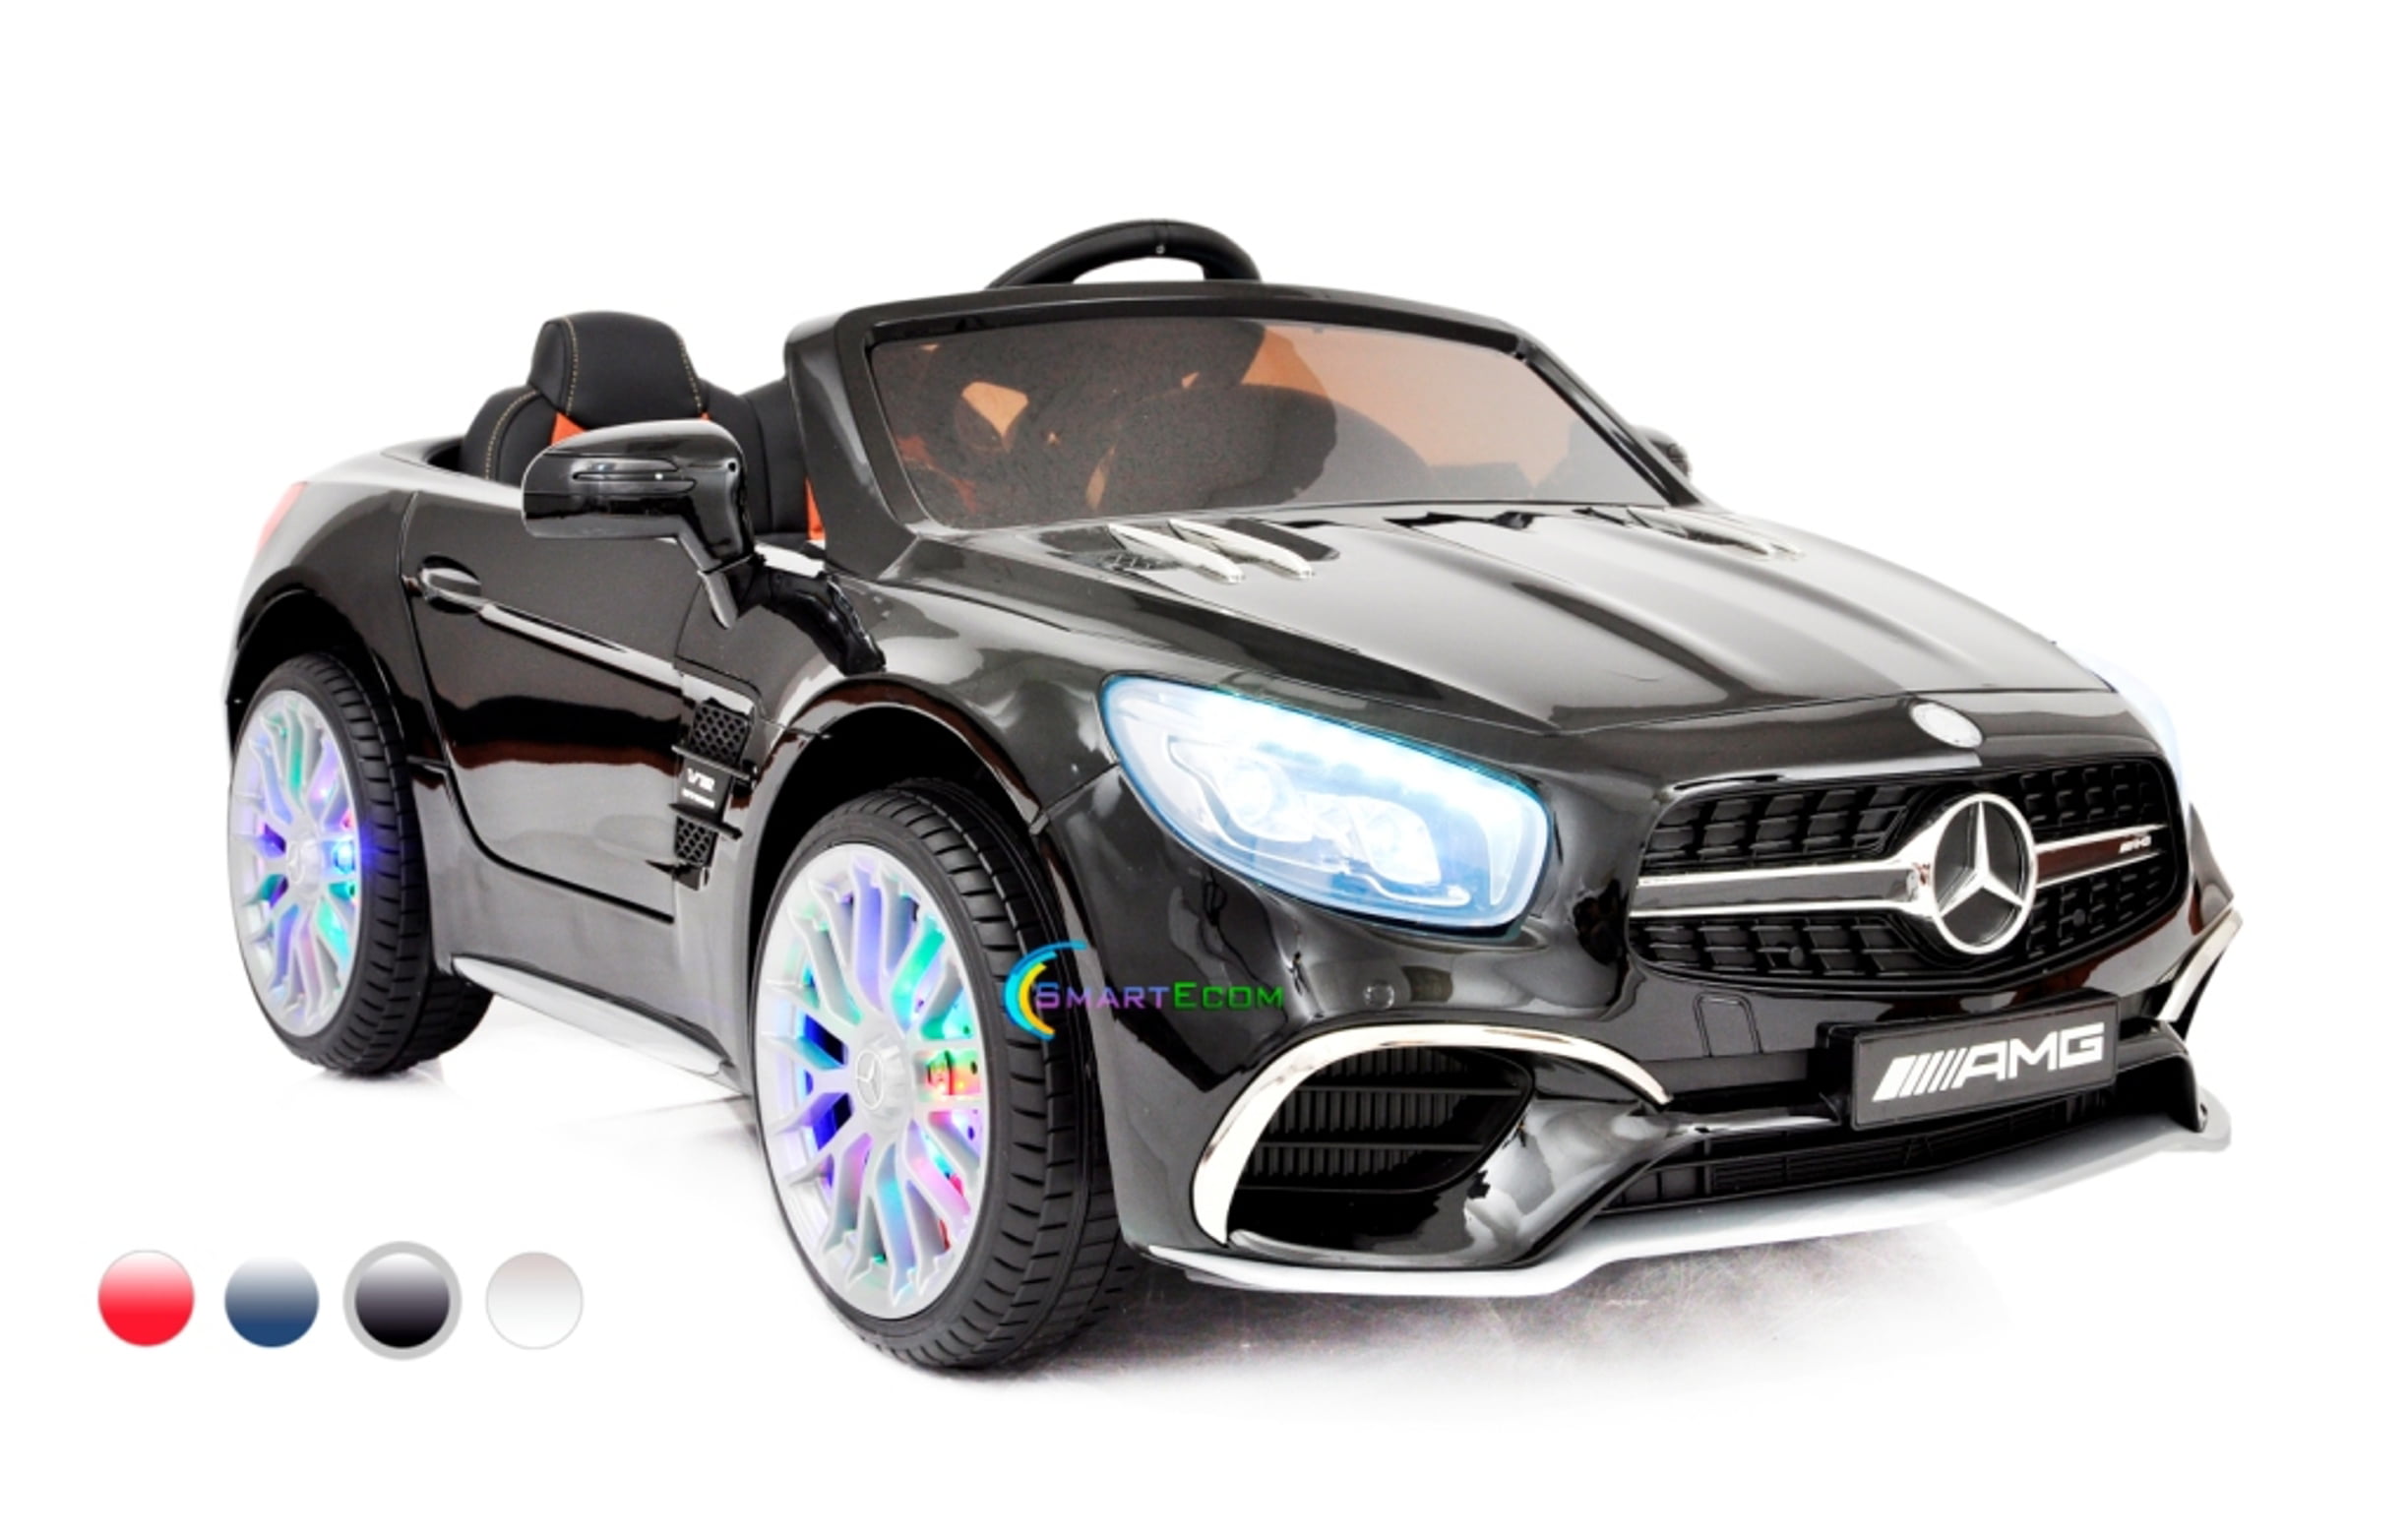 MERCEDES AMG SL65 RIDE ON CAR KIDS MP4 TOUCH SCREEN REMOTE CONTROL ELECTRIC 